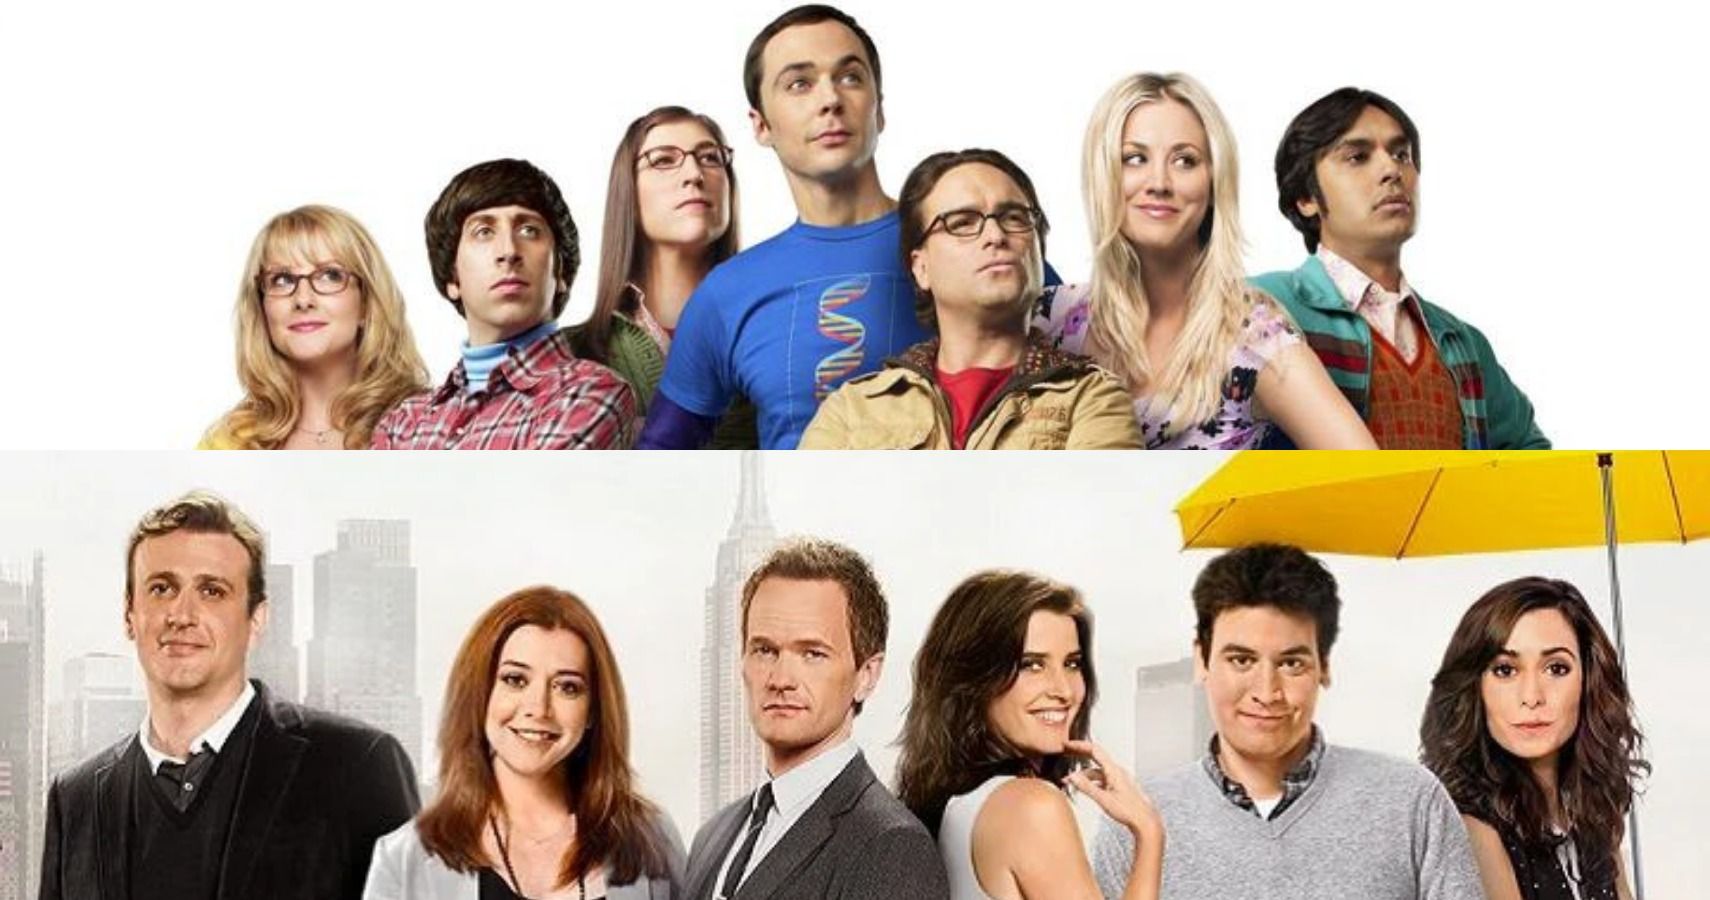 A collage showing the promotional images featuring the main characters of The Big Bang Theory (above) and How I Met Your Mother (below)